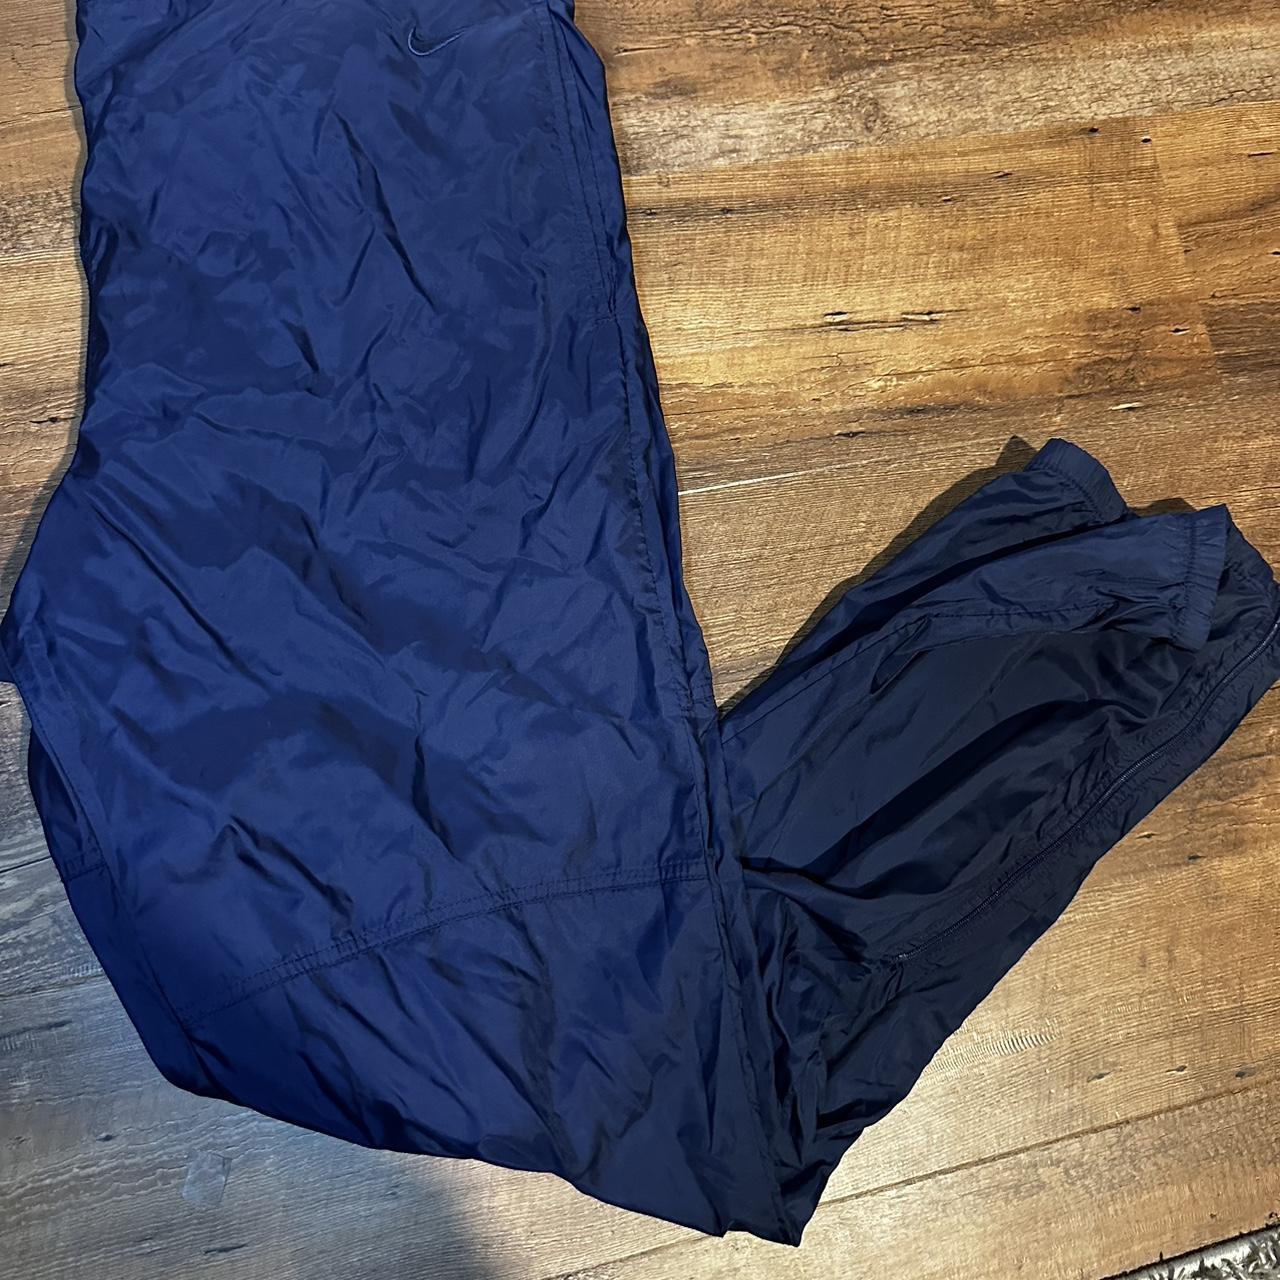 Nike navy blue y2k parachute pants - Large with a... - Depop